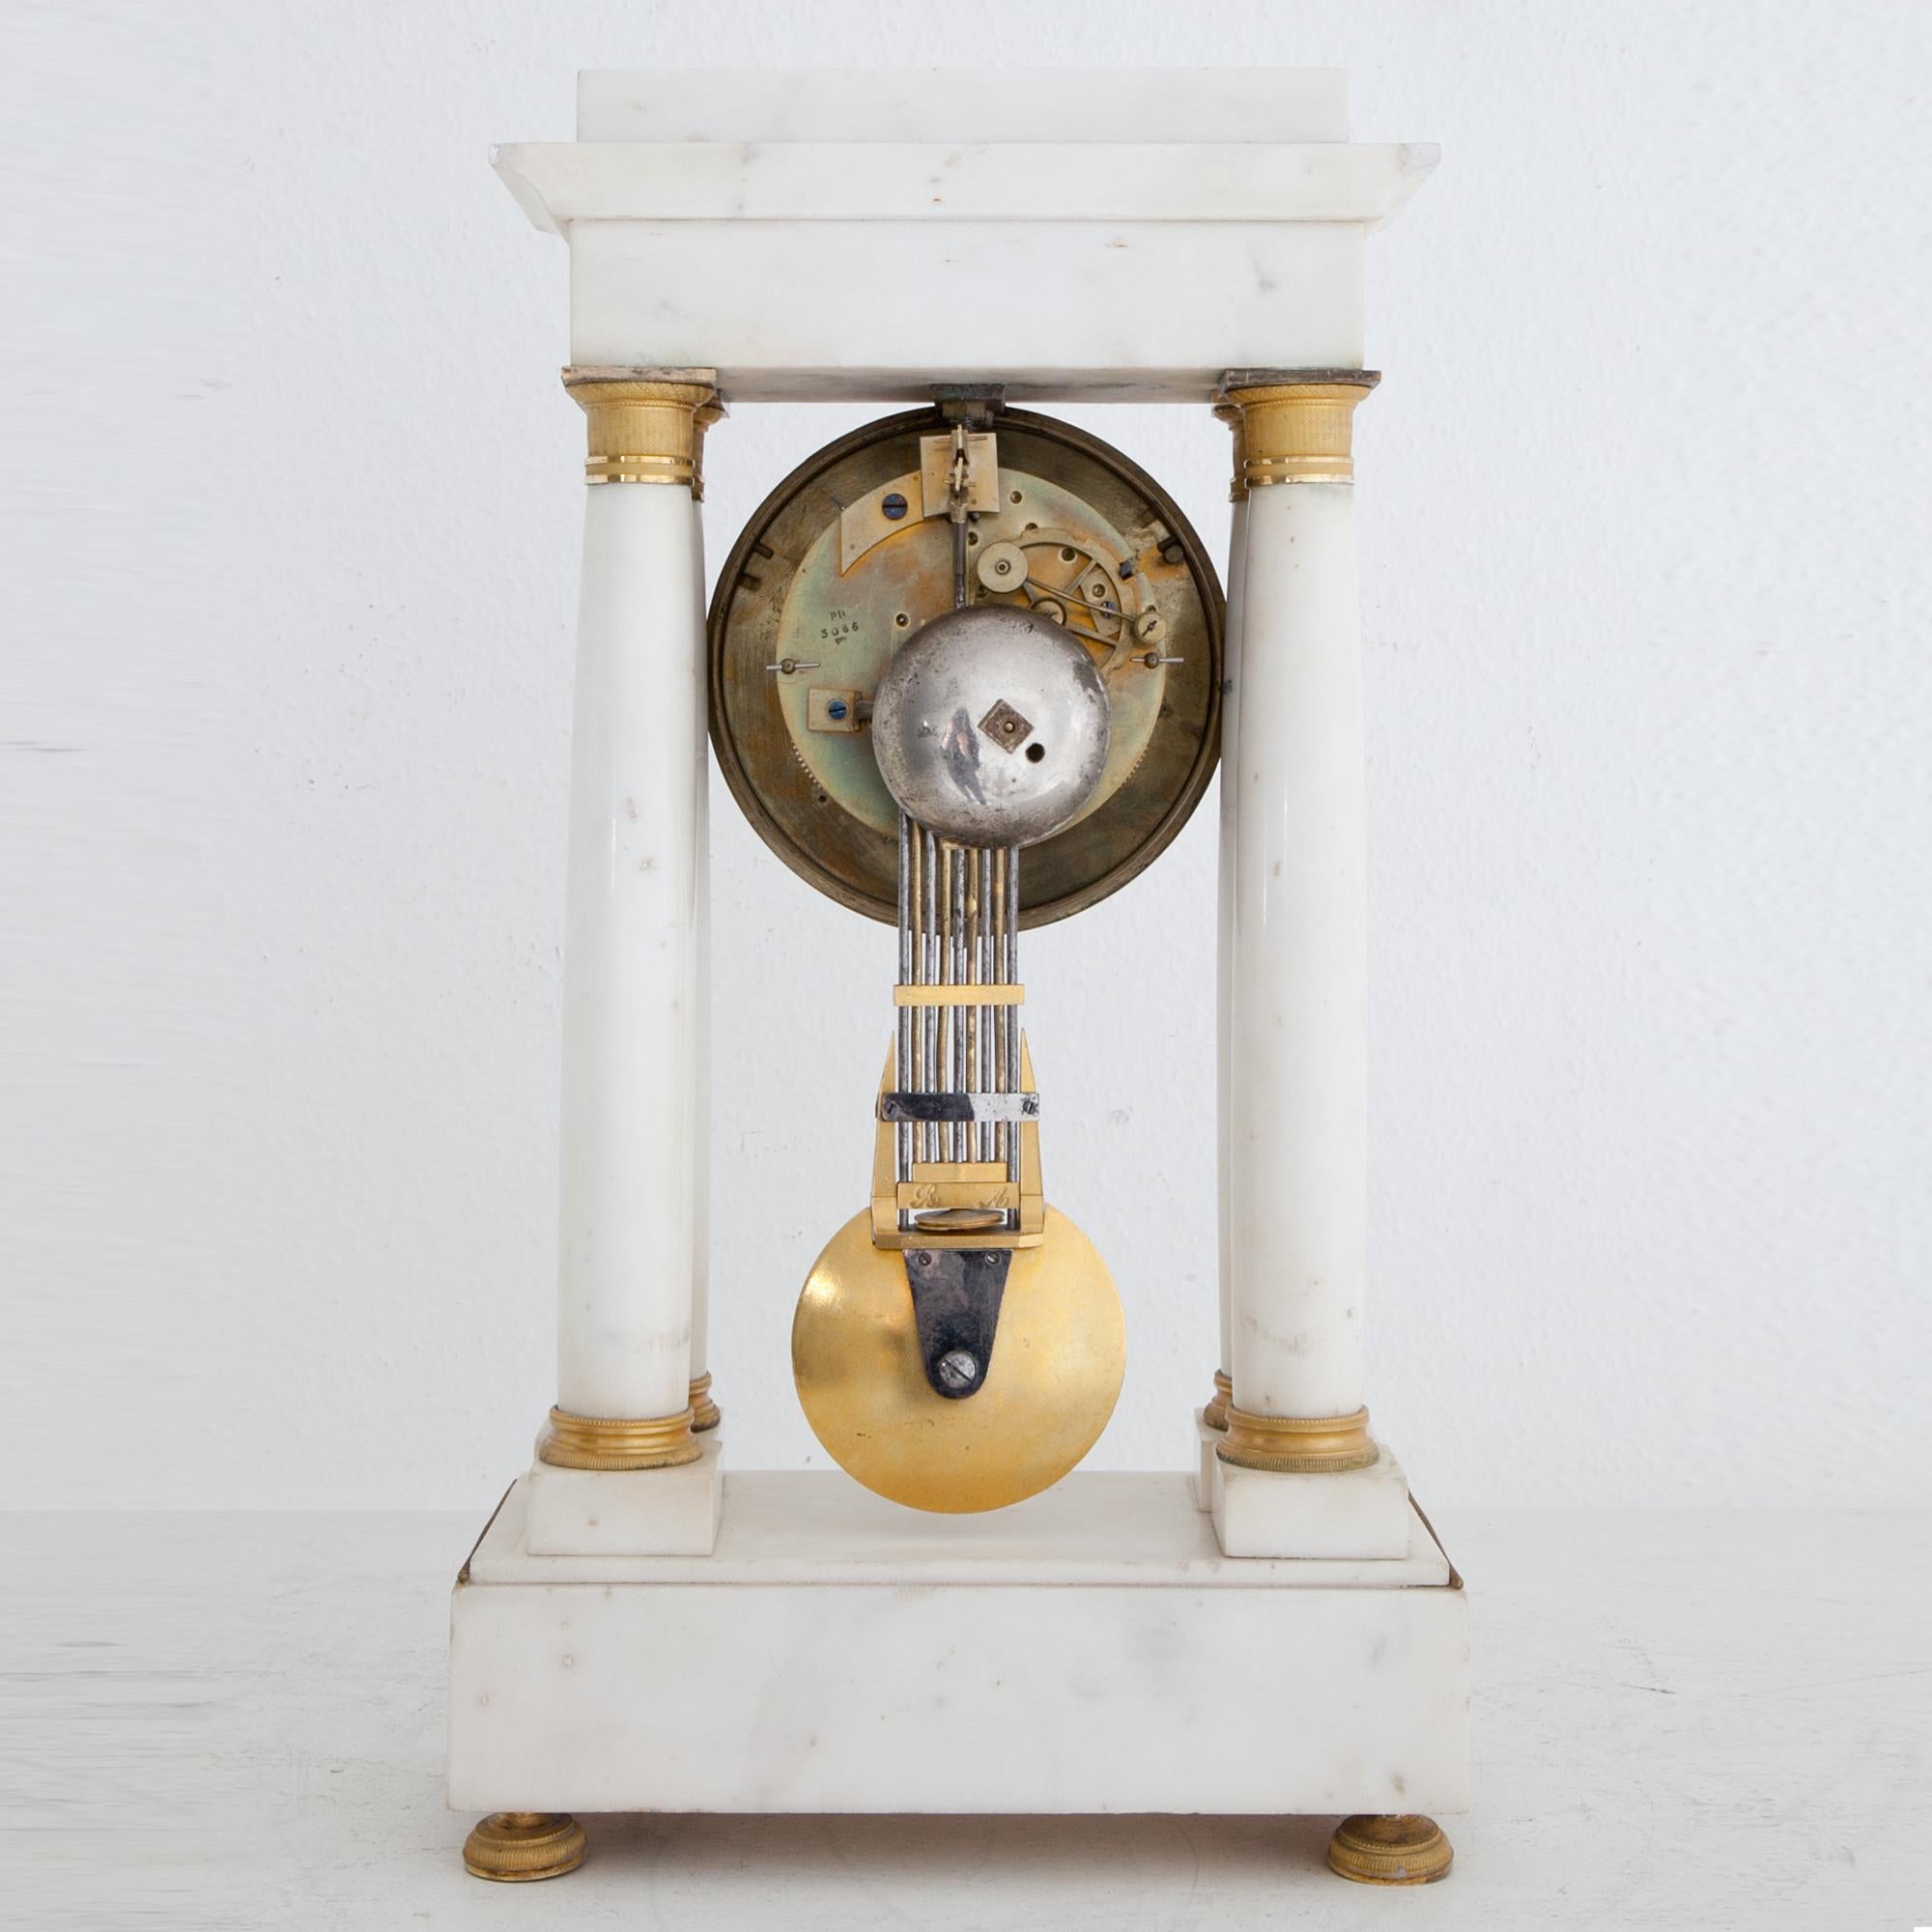 French pendule clock, the base, pedestal and columns are out of white marble. The silvered clockface with Roman numerals is inscribed Jeannest à Paris.